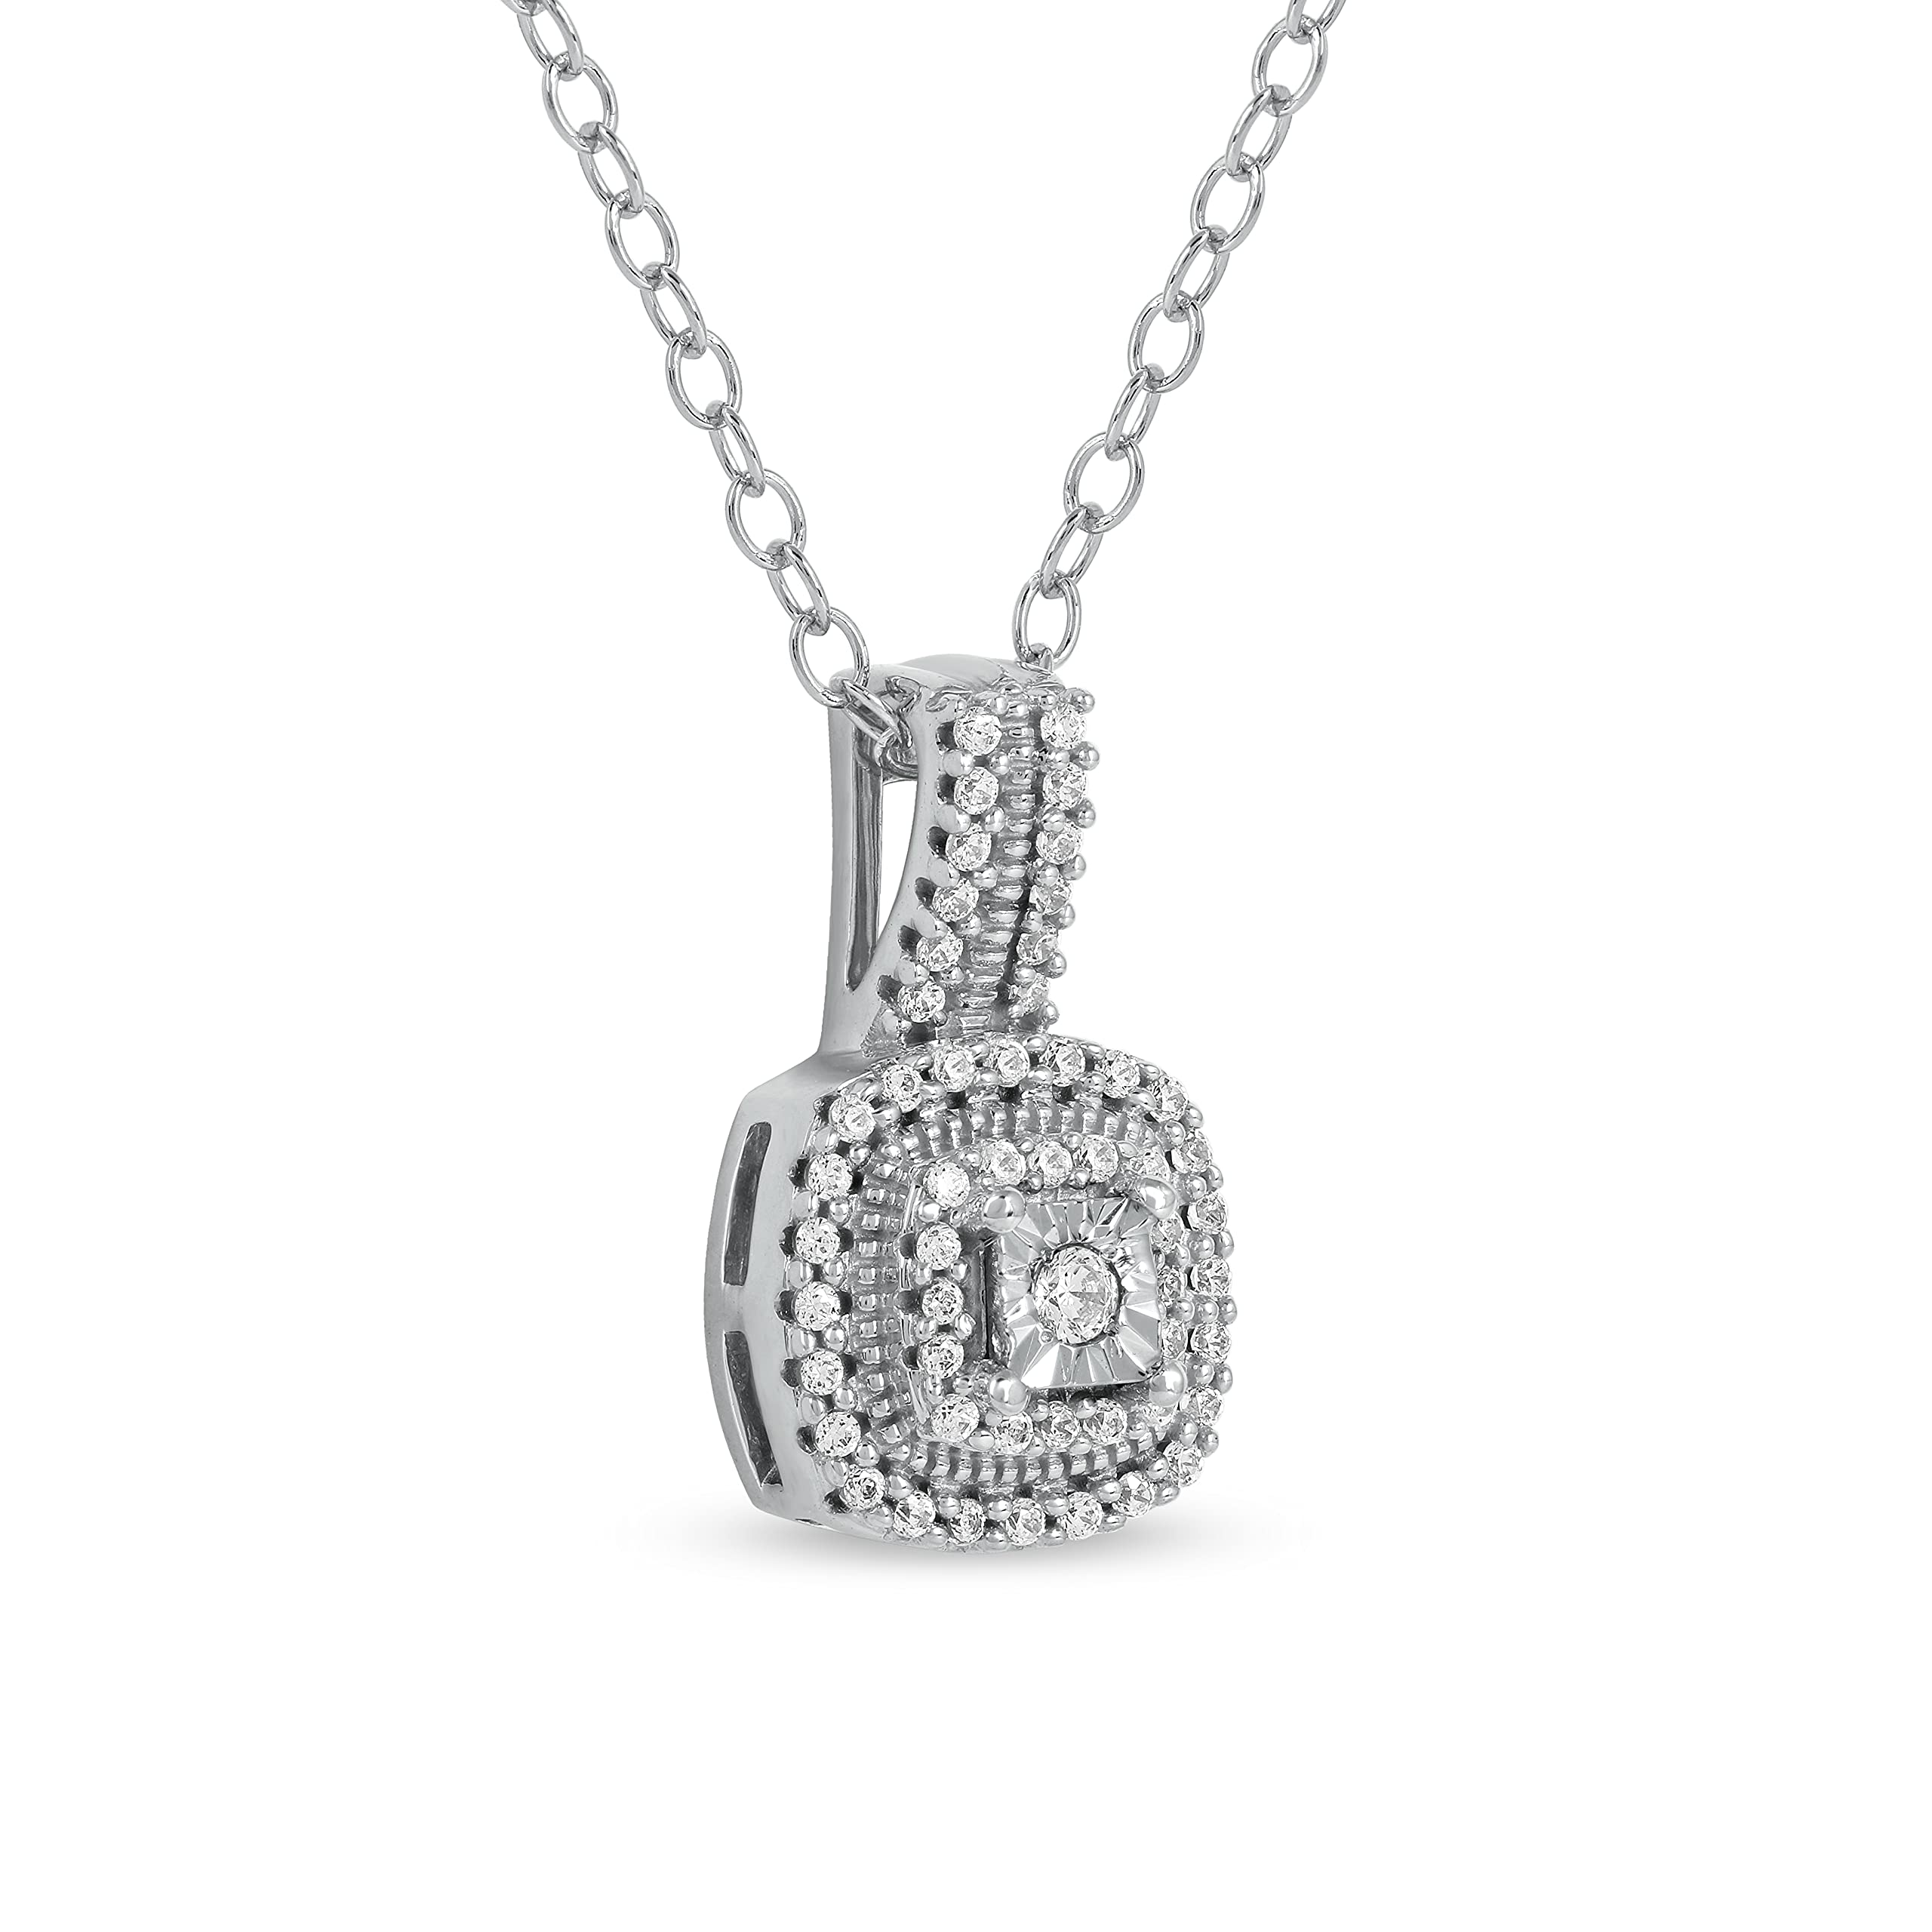 DZON Sterling Silver 1/6ct TDW Round-Cut Diamond Cushion Halo Composite Pendant Necklace Love Jewelry for Women Girl (I-J, I2)